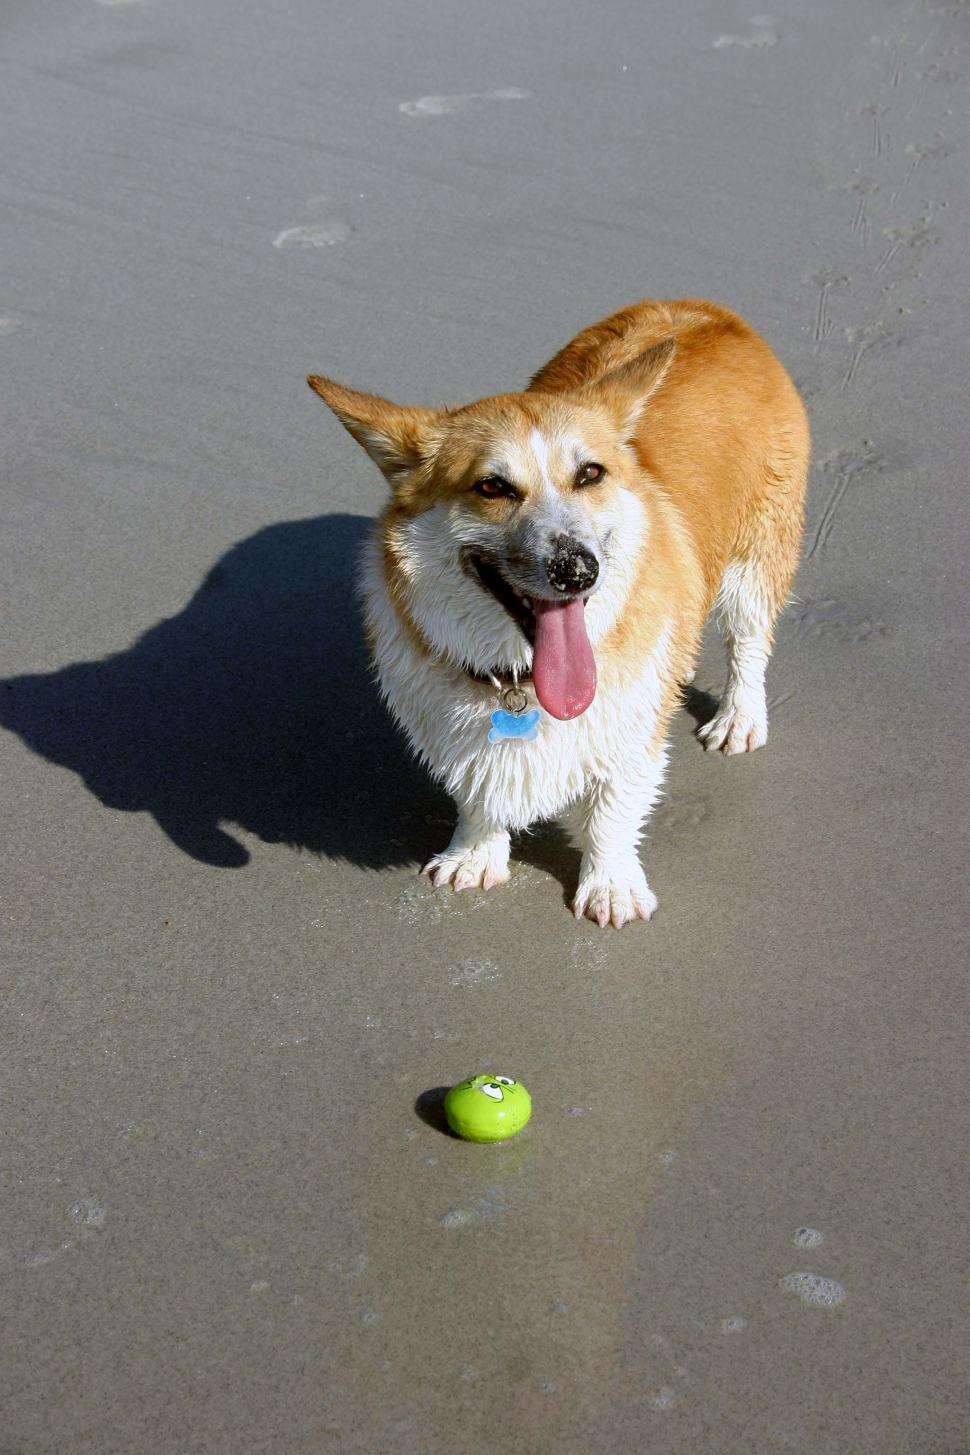 Free Image of Dog Standing on Beach Next to Ball 